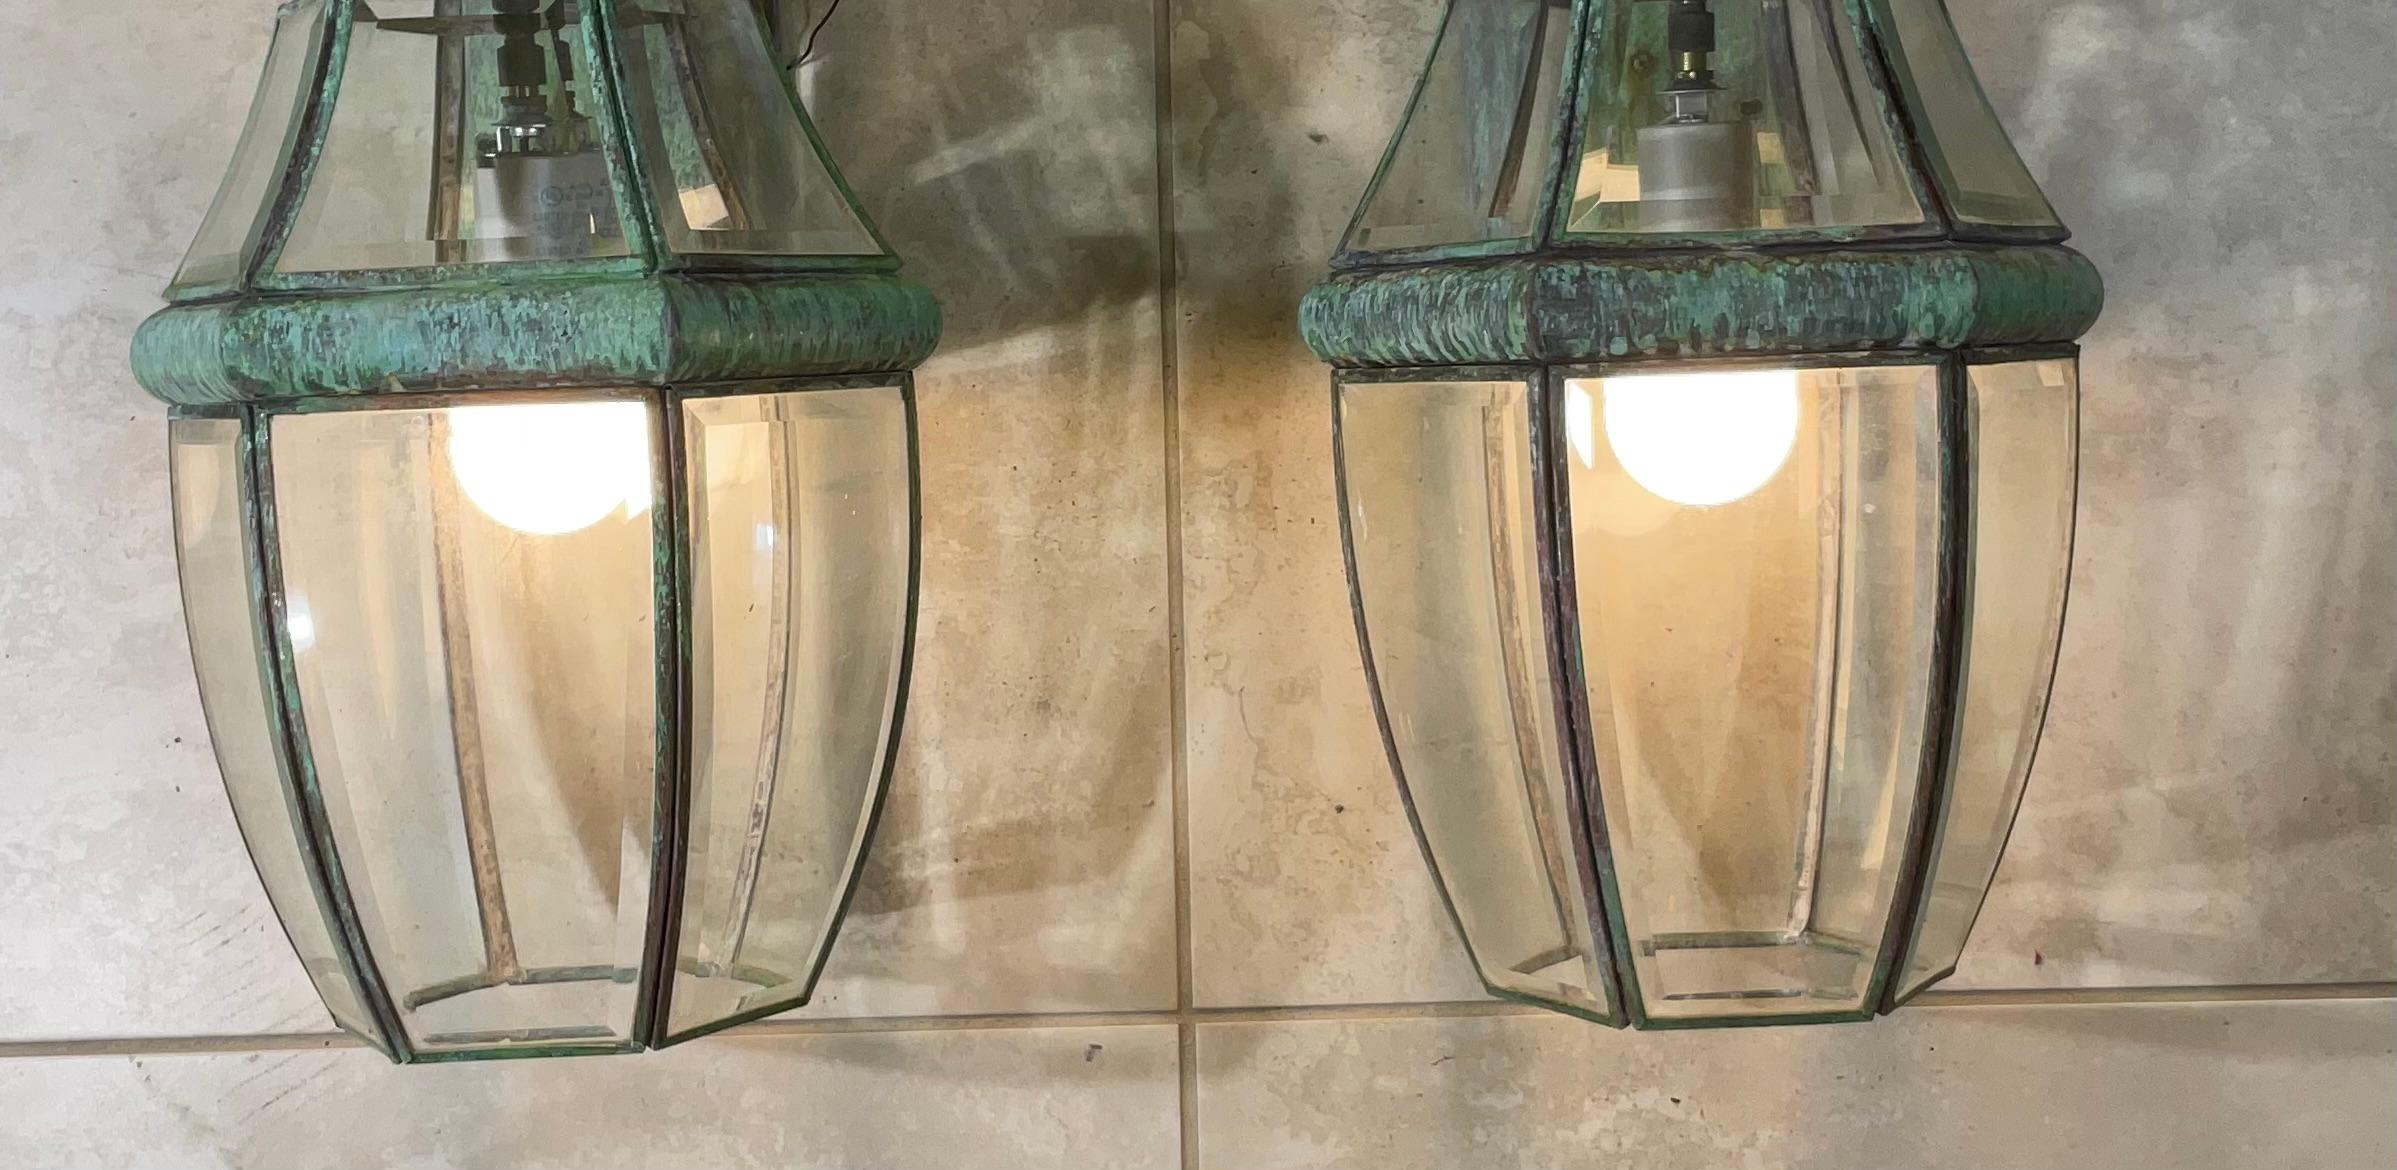 Elegant pair of wall lantern hand crafted from brass with one 60/watt lights each. 
 Suitable for wet locations, electrified and ready to use.
Beautiful thick beveled glass.
Decorative pair of lantern indoor or outdoor.